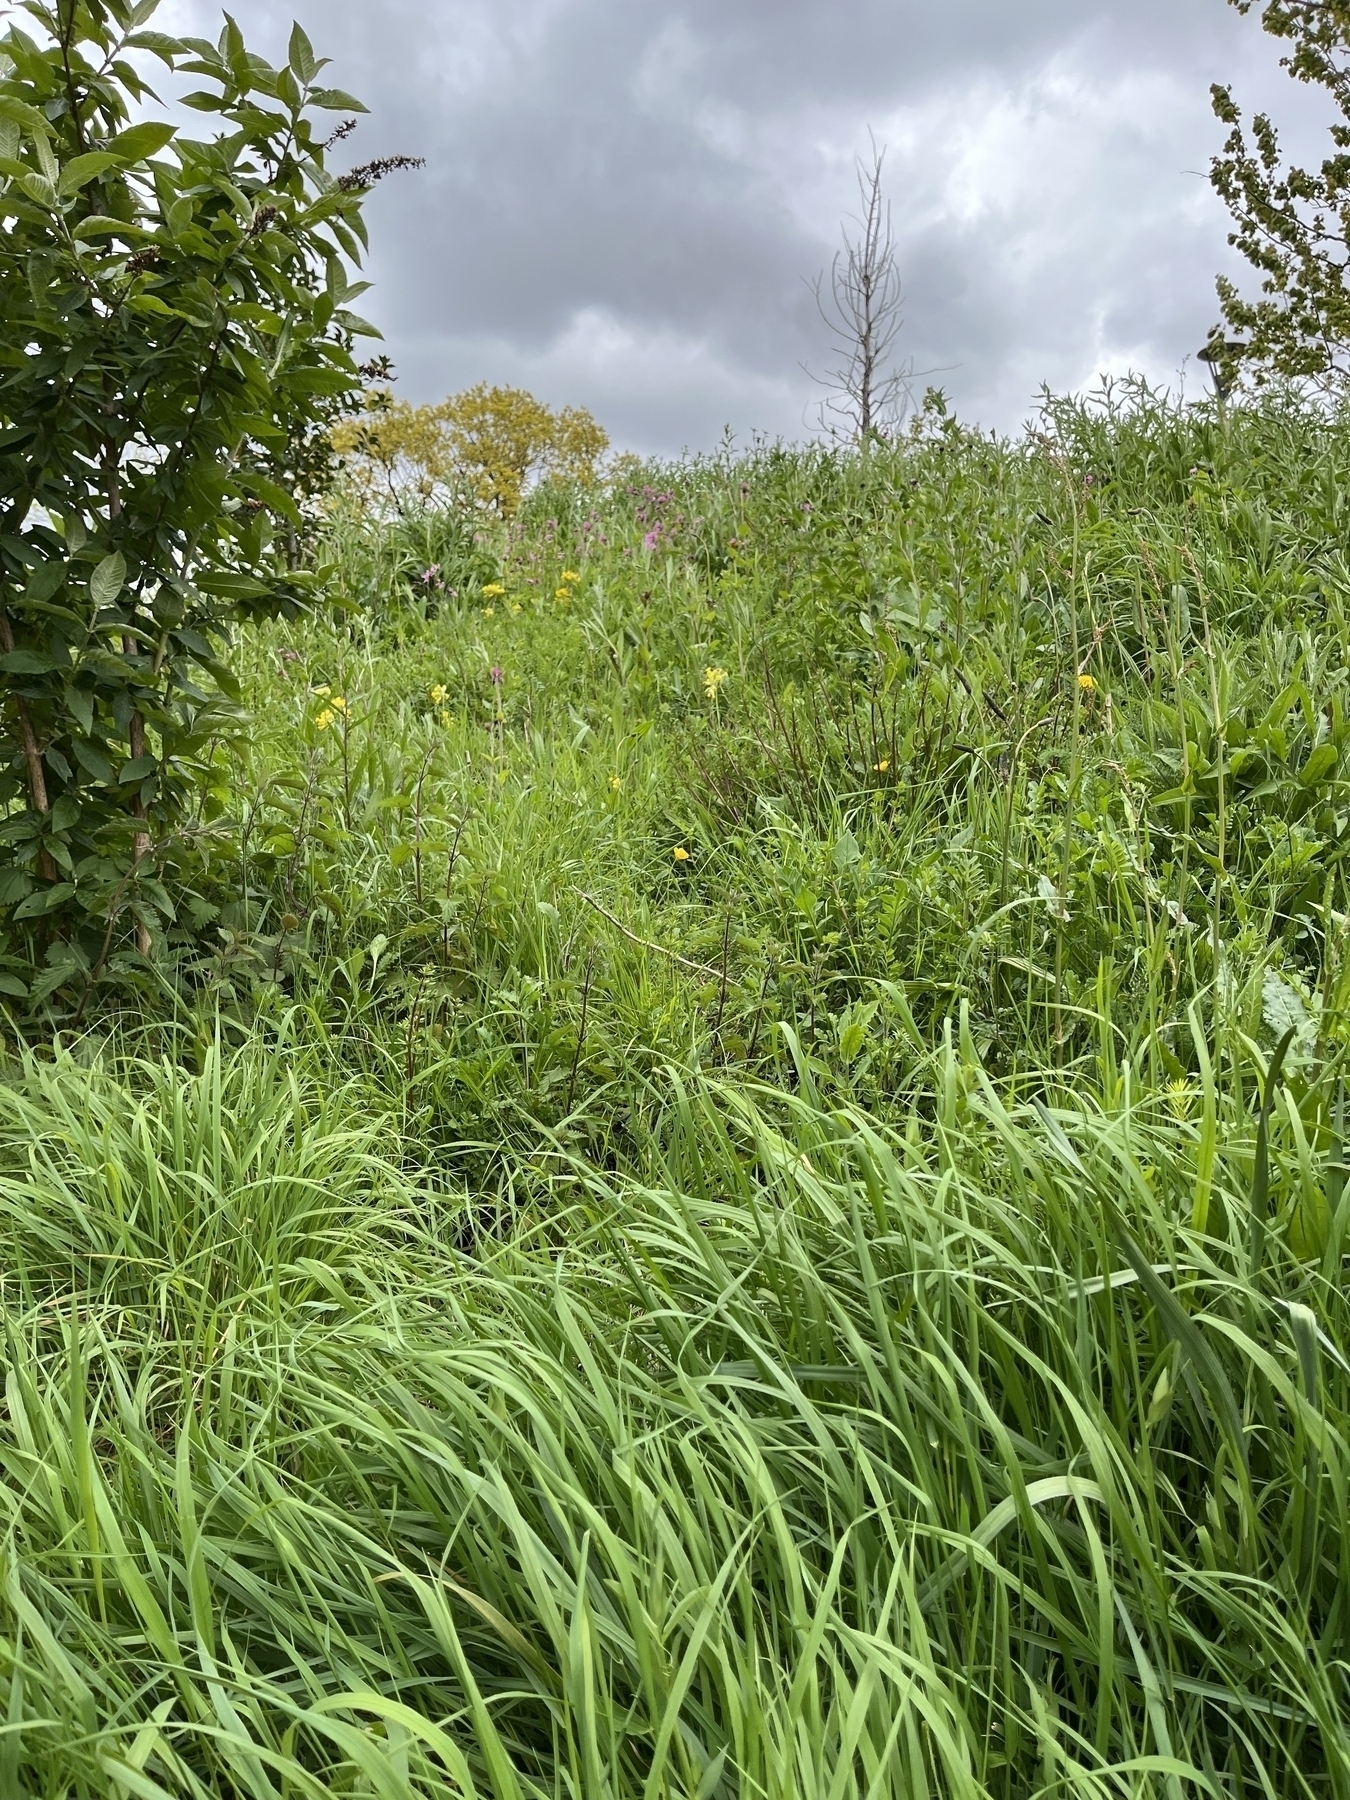 View up a bank, with drifts of grasses, scattered with a few wild flowers. A grey sky can be seen above the bank’s top. 